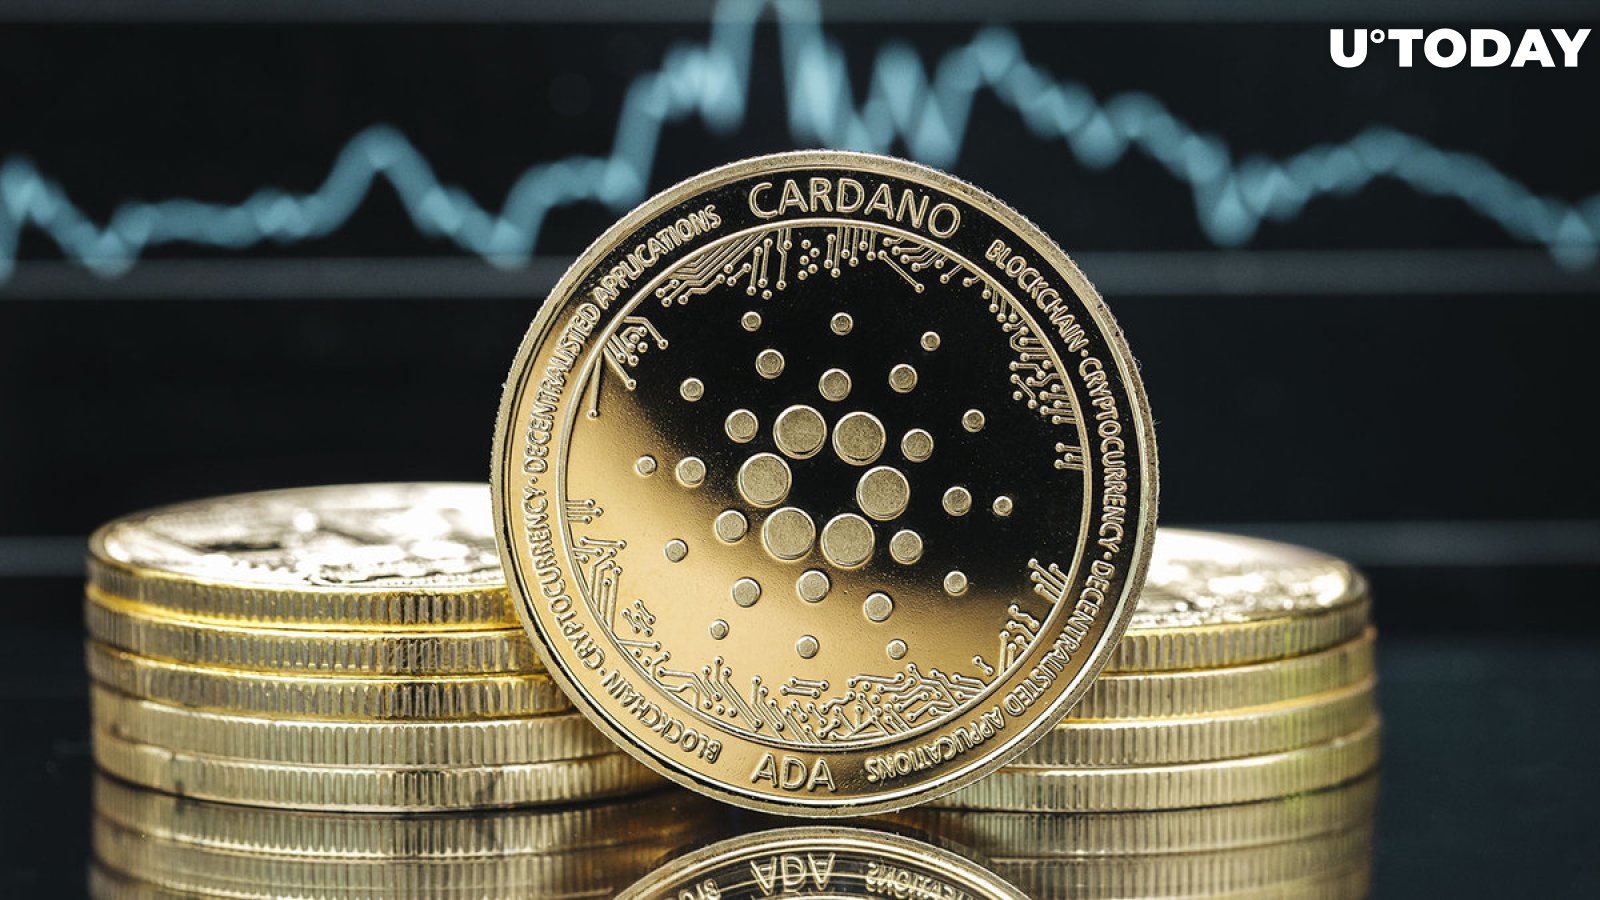 Cardano (ADA) Price Slip Deepens, Here Are Likely Beneficiaries of This Trend